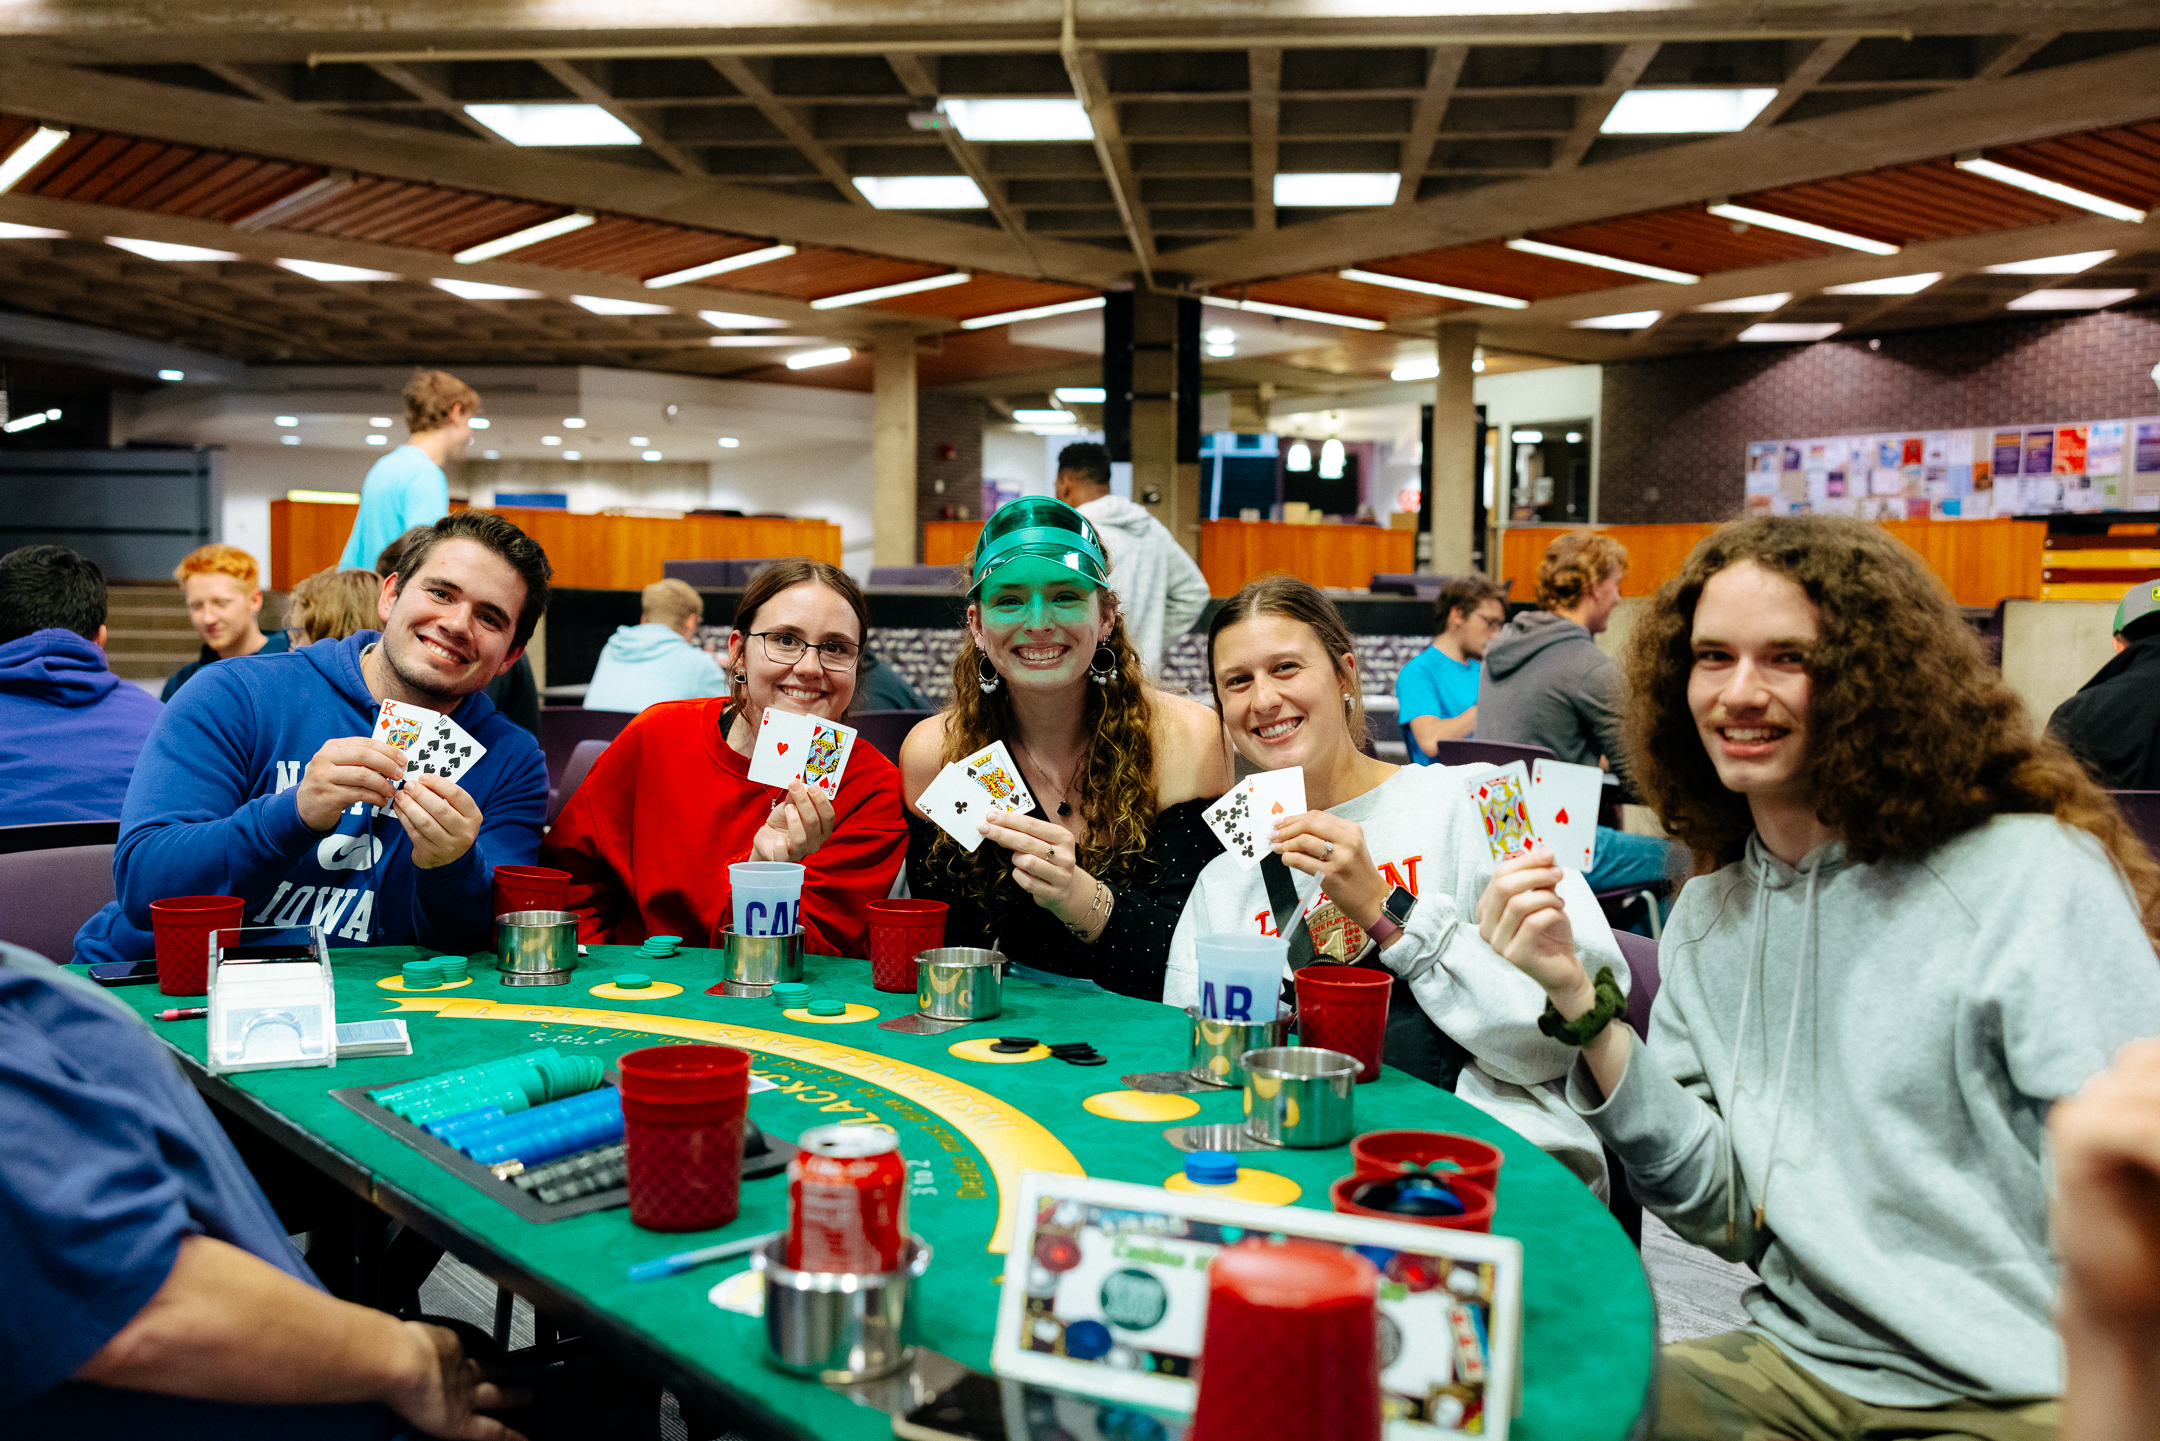 Students sitting at a Blackjack table